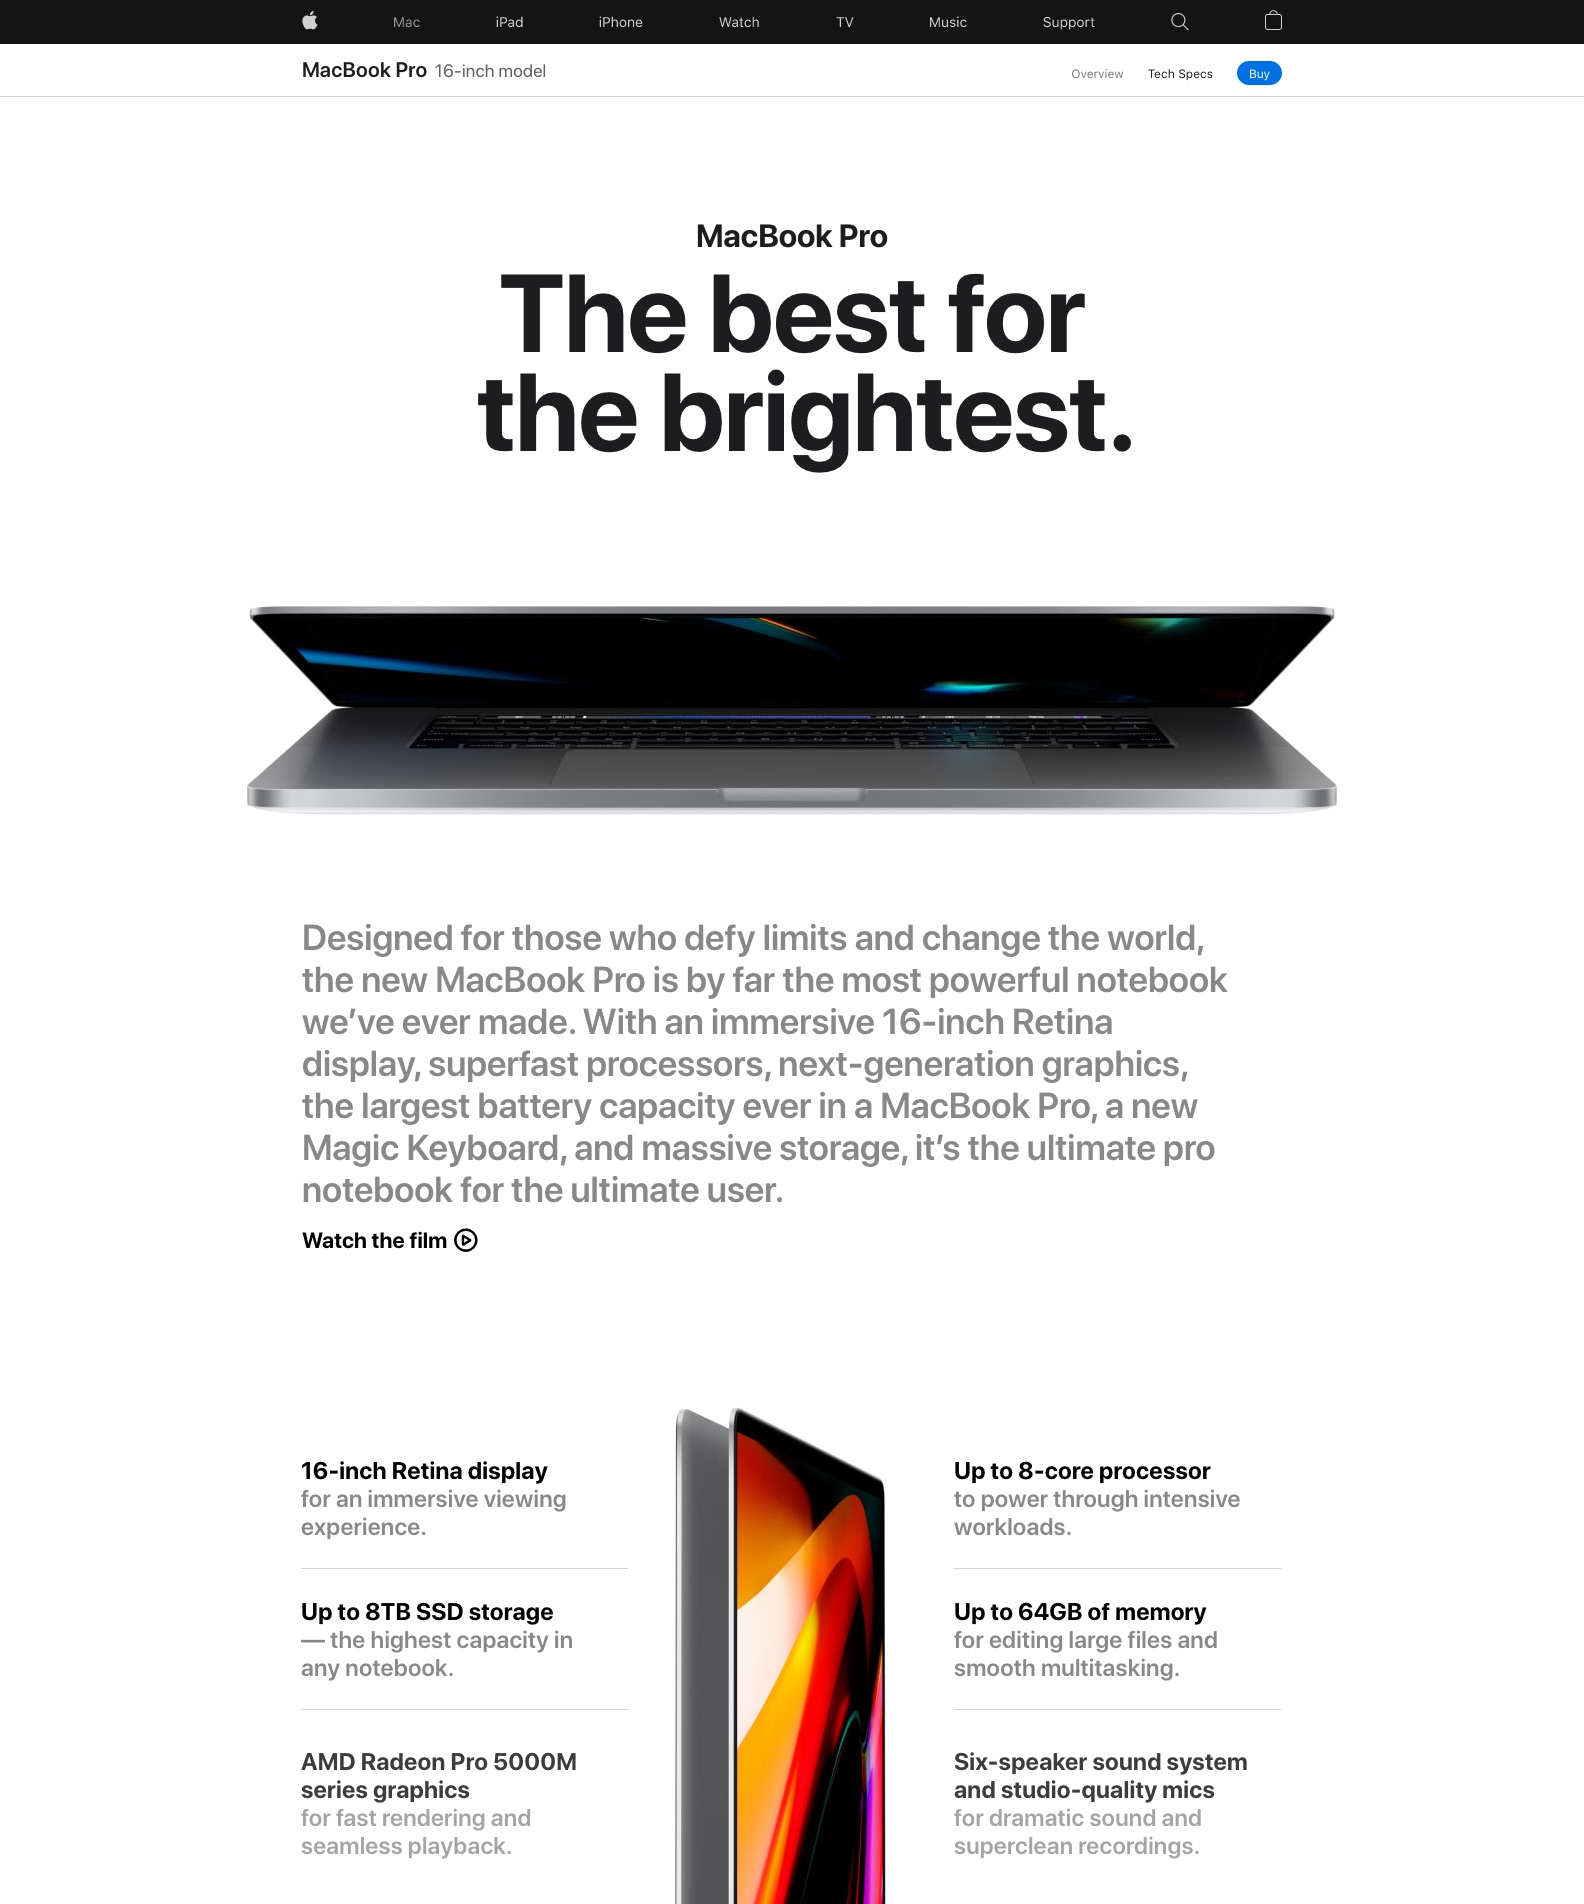 Apple's page for its MacBook Pro 16" model